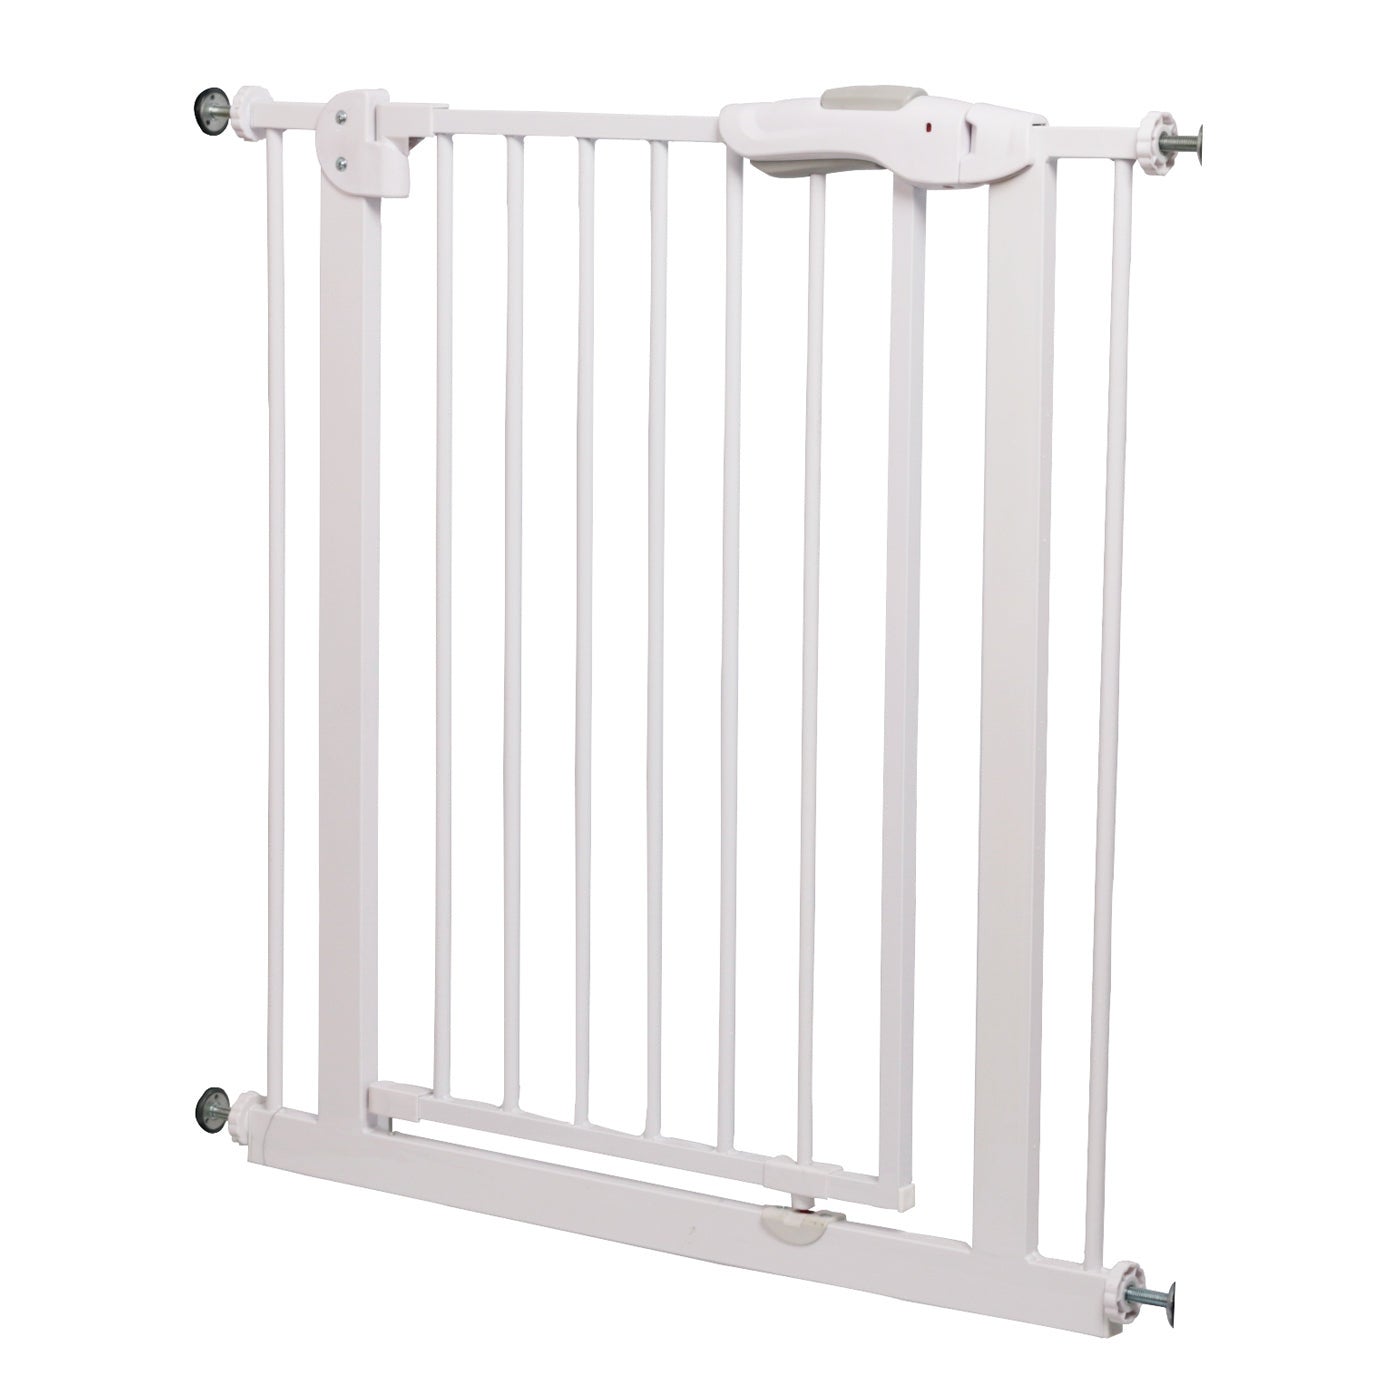 96cm Extra Height Baby and Pet Safety Security Gate for Doorway, Stairs